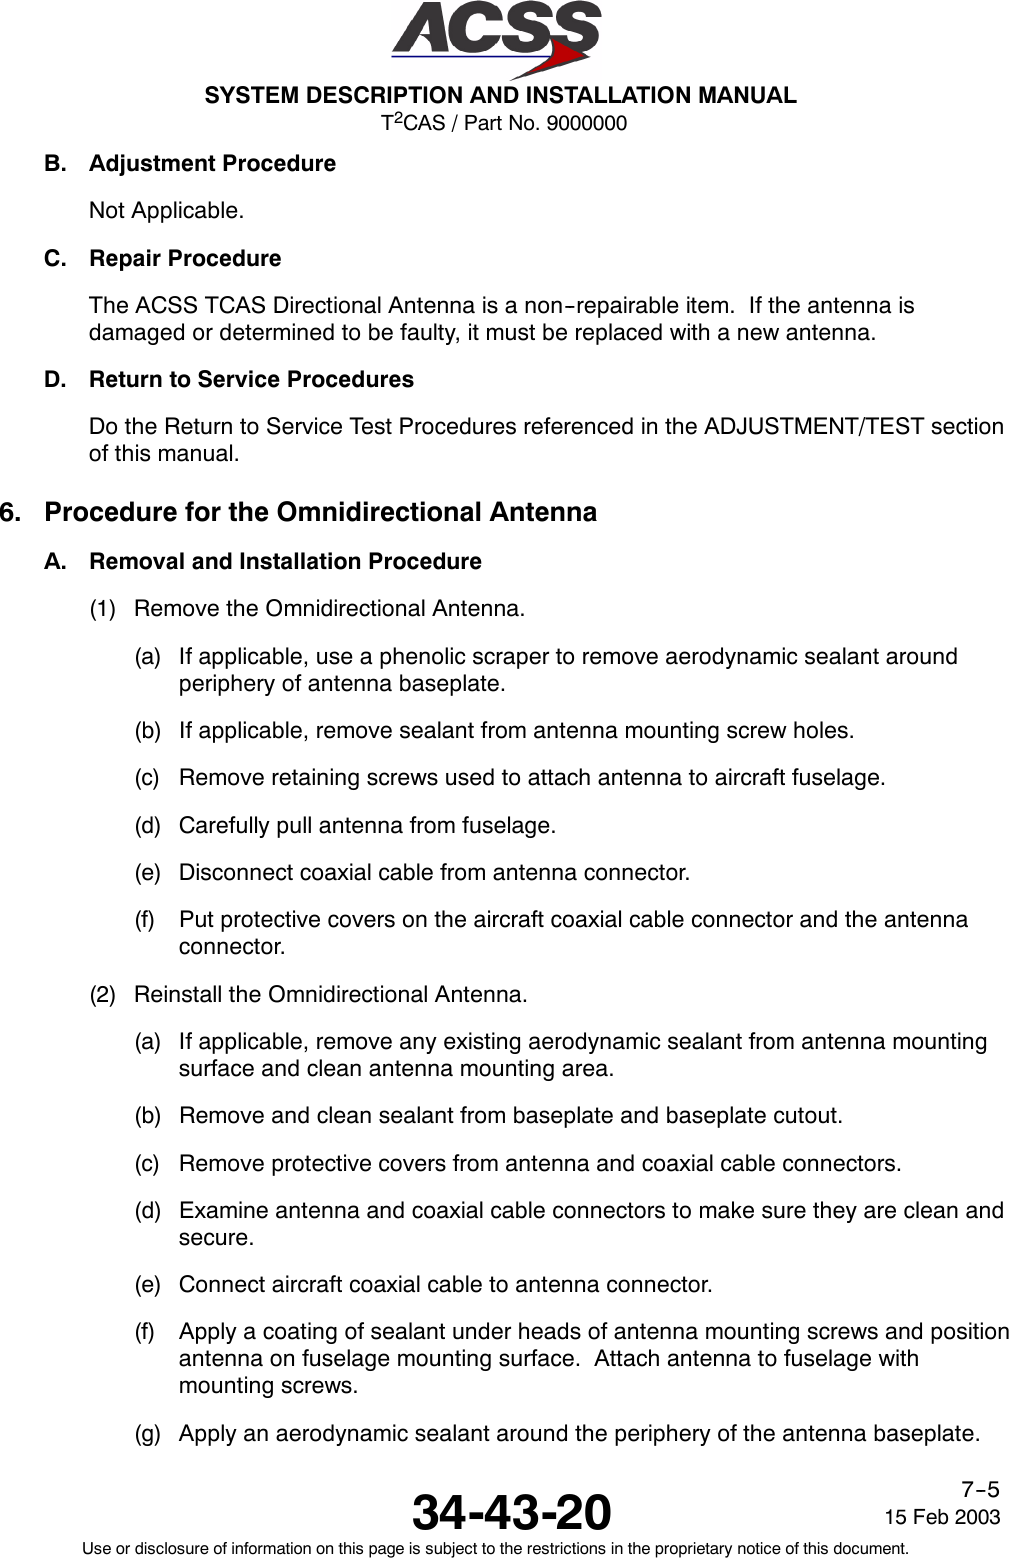 T2CAS / Part No. 9000000SYSTEM DESCRIPTION AND INSTALLATION MANUAL34-43-20 15 Feb 2003Use or disclosure of information on this page is subject to the restrictions in the proprietary notice of this document.7--5B. Adjustment ProcedureNot Applicable.C. Repair ProcedureThe ACSS TCAS Directional Antenna is a non--repairable item. If the antenna isdamaged or determined to be faulty, it must be replaced with a new antenna.D. Return to Service ProceduresDo the Return to Service Test Procedures referenced in the ADJUSTMENT/TEST sectionof this manual.6. Procedure for the Omnidirectional AntennaA. Removal and Installation Procedure(1) Remove the Omnidirectional Antenna.(a) If applicable, use a phenolic scraper to remove aerodynamic sealant aroundperiphery of antenna baseplate.(b) If applicable, remove sealant from antenna mounting screw holes.(c) Remove retaining screws used to attach antenna to aircraft fuselage.(d) Carefully pull antenna from fuselage.(e) Disconnect coaxial cable from antenna connector.(f) Put protective covers on the aircraft coaxial cable connector and the antennaconnector.(2) Reinstall the Omnidirectional Antenna.(a) If applicable, remove any existing aerodynamic sealant from antenna mountingsurface and clean antenna mounting area.(b) Remove and clean sealant from baseplate and baseplate cutout.(c) Remove protective covers from antenna and coaxial cable connectors.(d) Examine antenna and coaxial cable connectors to make sure they are clean andsecure.(e) Connect aircraft coaxial cable to antenna connector.(f) Apply a coating of sealant under heads of antenna mounting screws and positionantenna on fuselage mounting surface. Attach antenna to fuselage withmounting screws.(g) Apply an aerodynamic sealant around the periphery of the antenna baseplate.